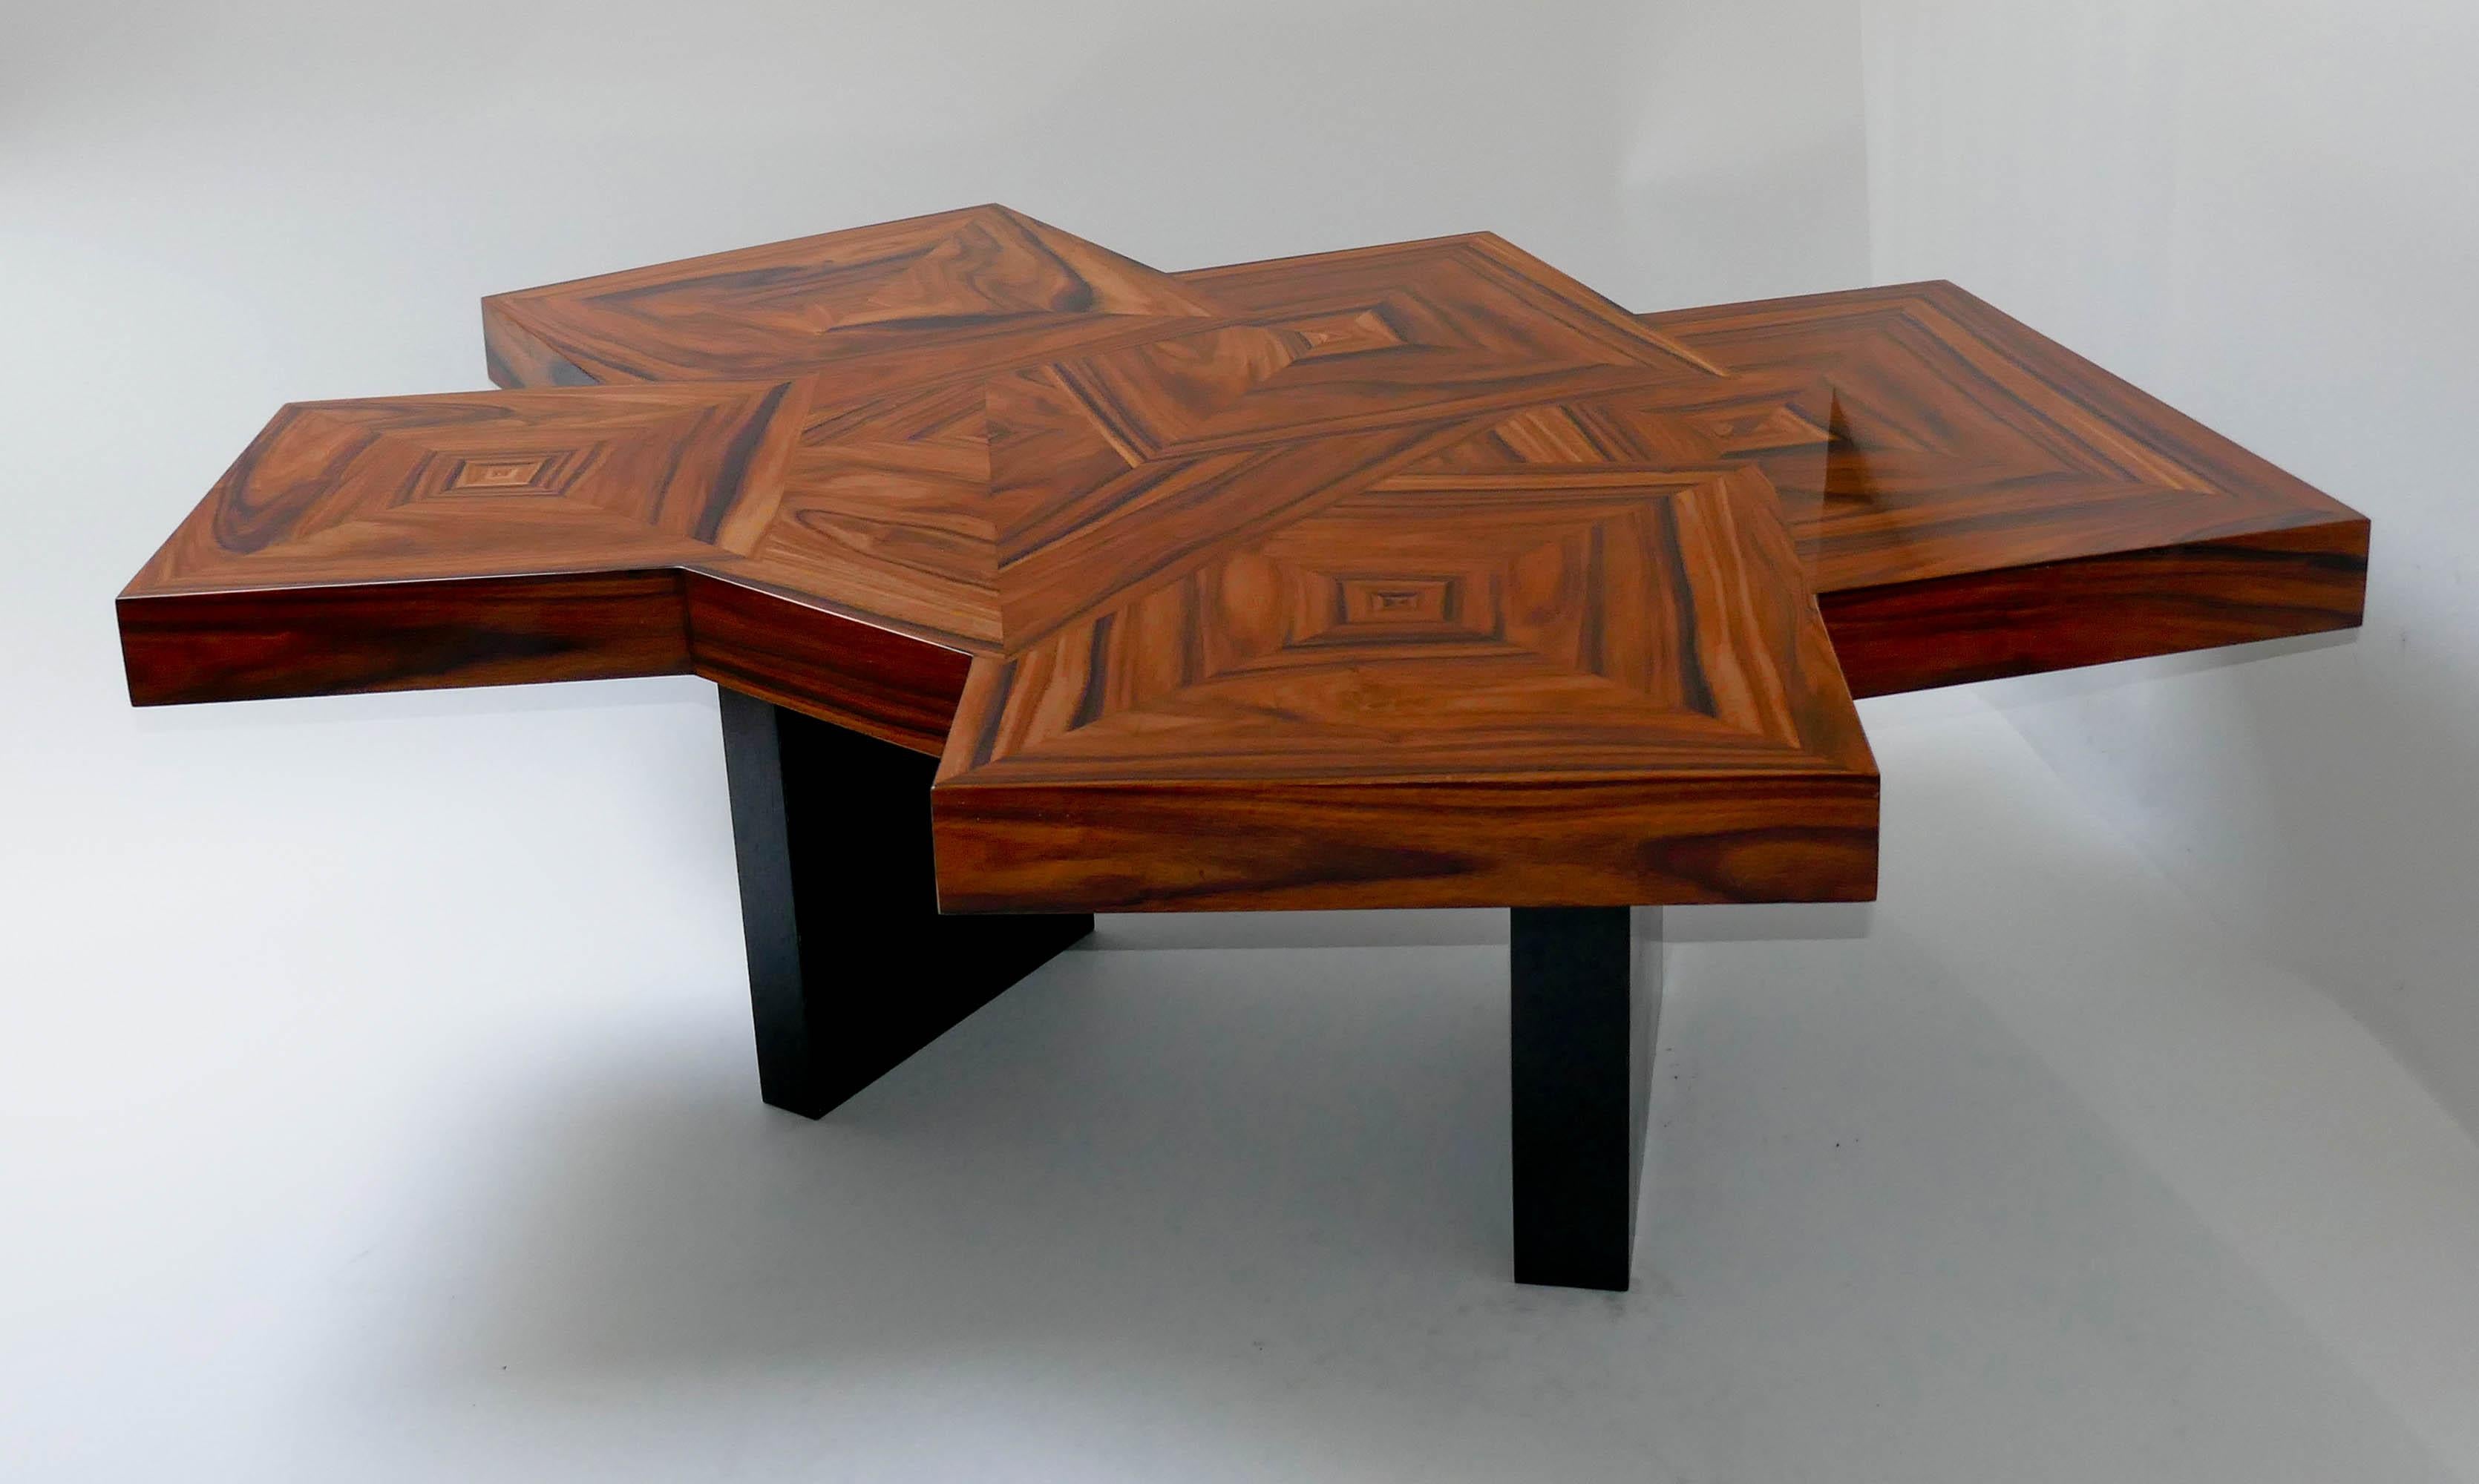 Coffee table in marquetery of Santos wood. The legs are in black tinted oak.
 